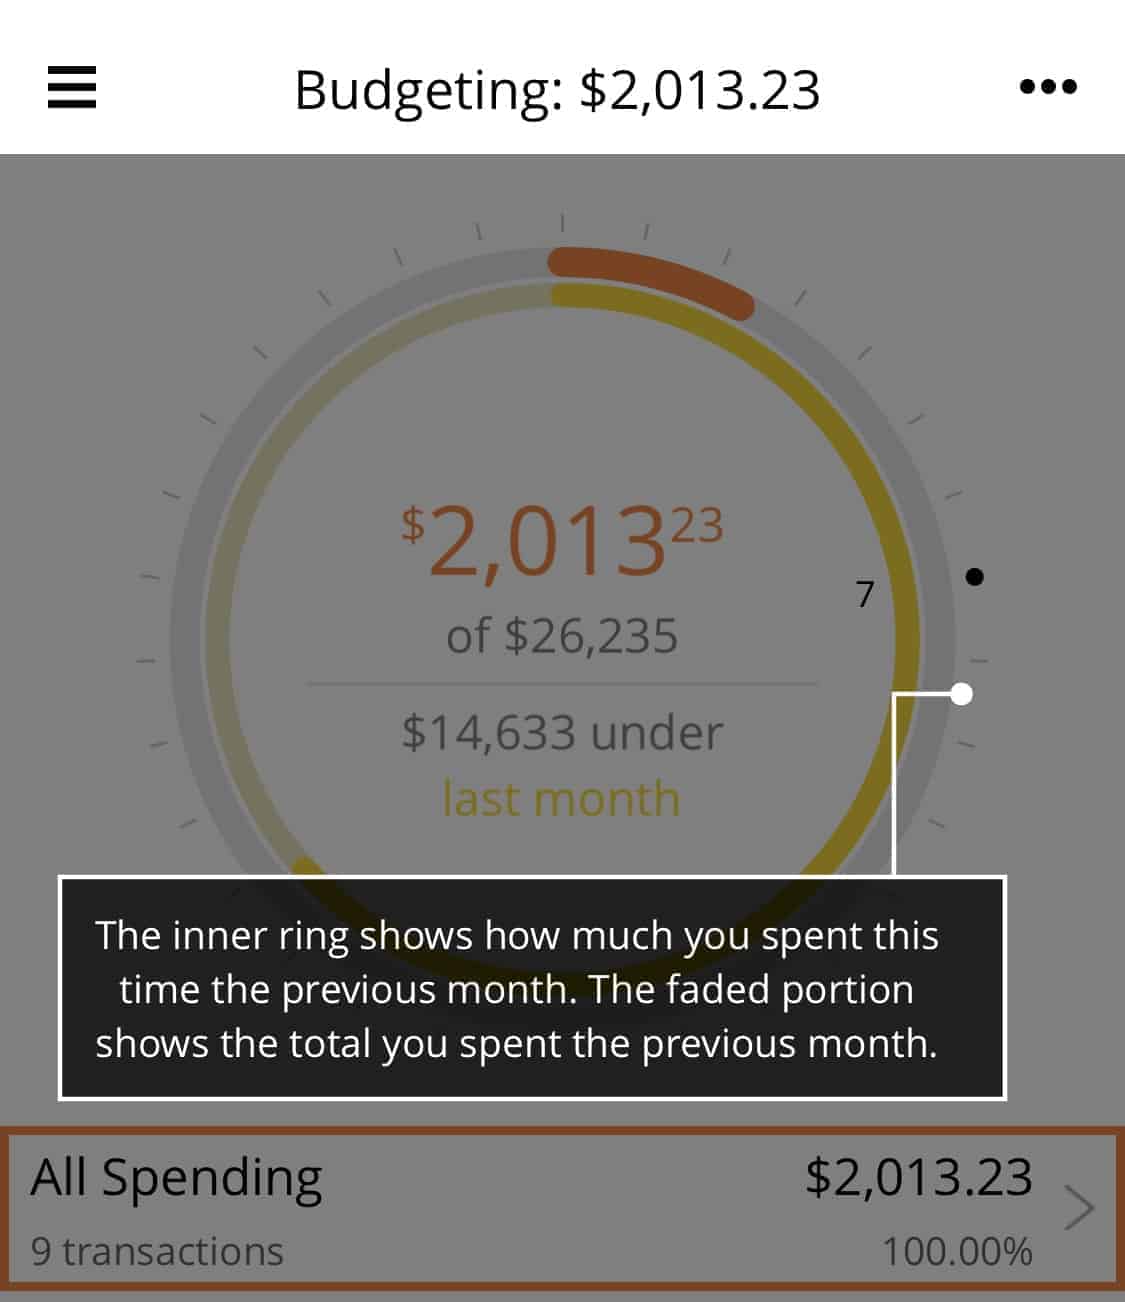 Personal Capital Budgeting Tracker shows the Previous Month budget via the inner ring